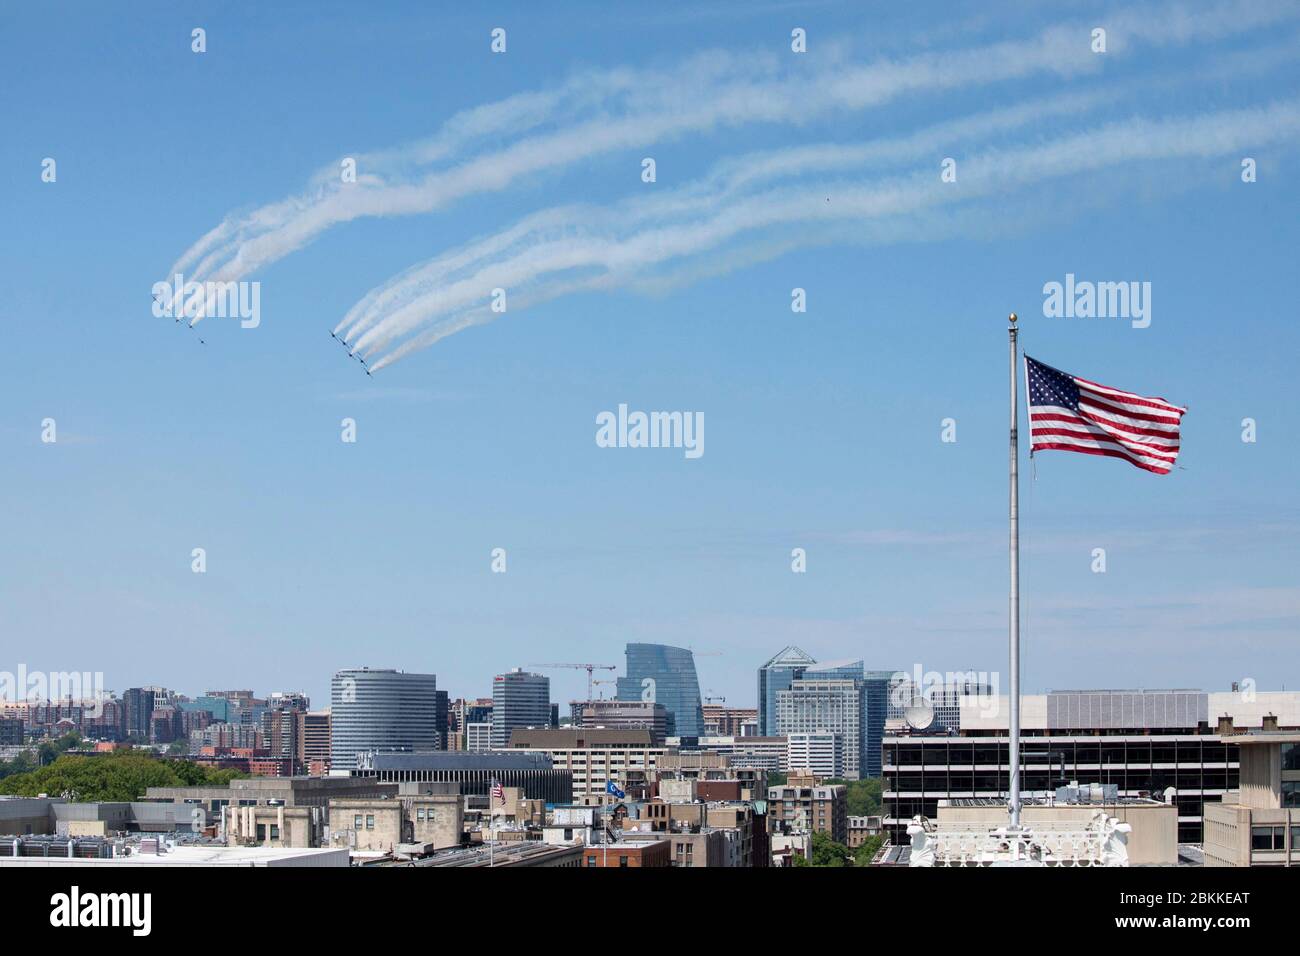 The U.S. Air Force Air Demonstration Squadron, the Thunderbirds, and the Navy Blue Angels, fly in formation over Washington, during the America Strong flyover May 2, 2020 in Washington, D.C. America Strong is a salute from the Navy and Air Force to recognize healthcare workers, first responders, and other essential personnel in a show of national solidarity during the COVID-19 pandemic. Stock Photo